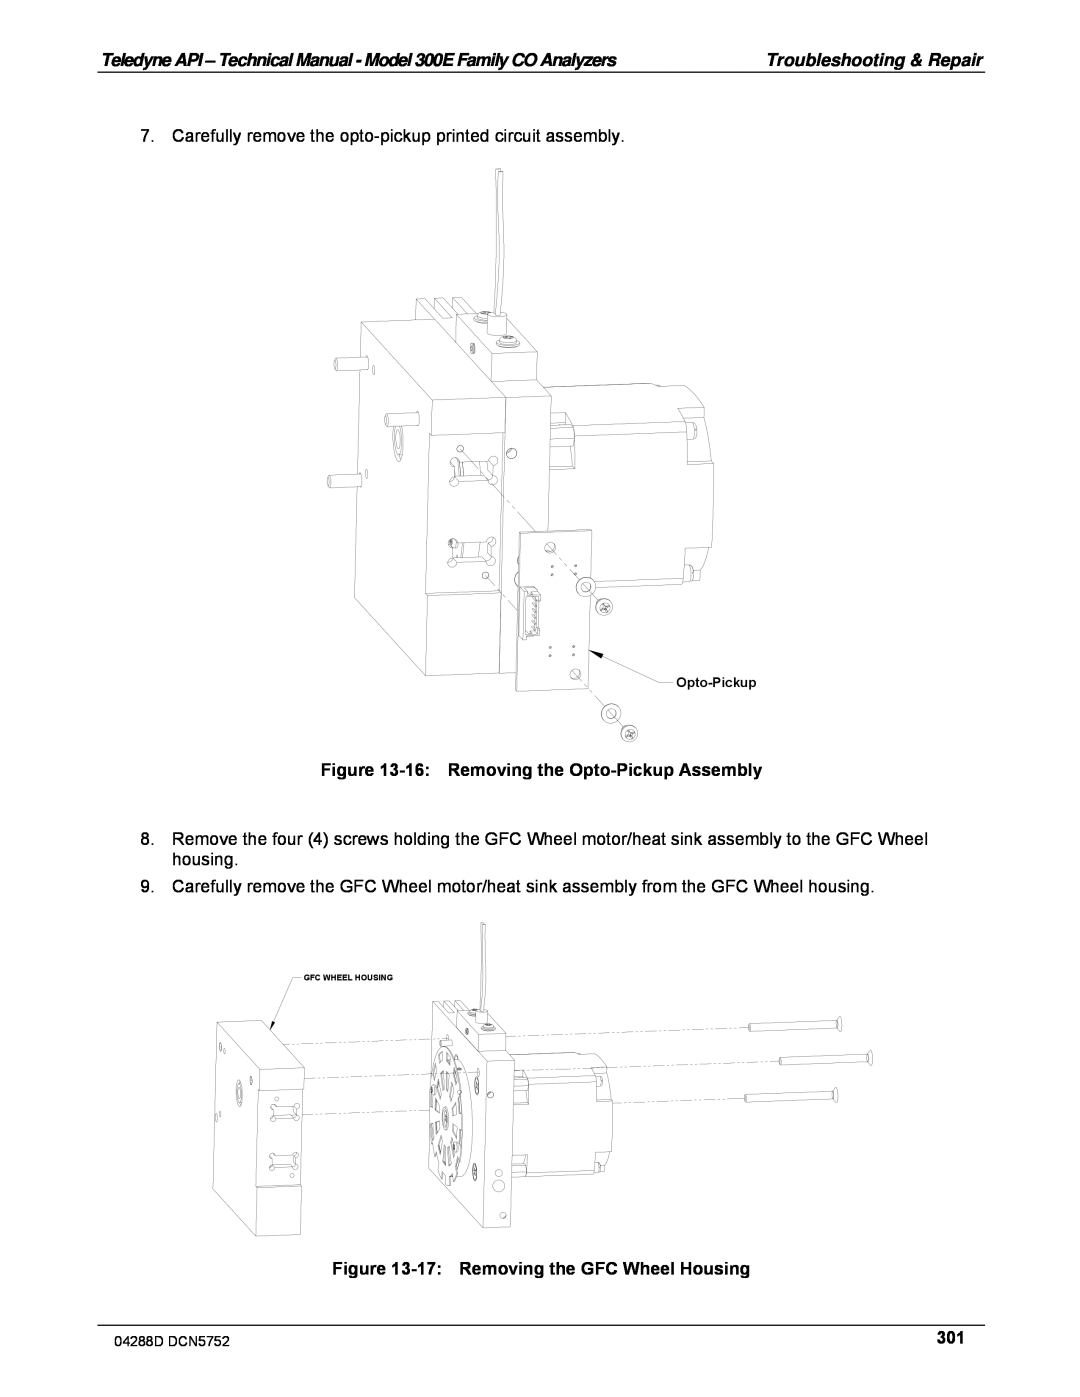 Teledyne M300EM operation manual 16:Removing the Opto-PickupAssembly, 17:Removing the GFC Wheel Housing 